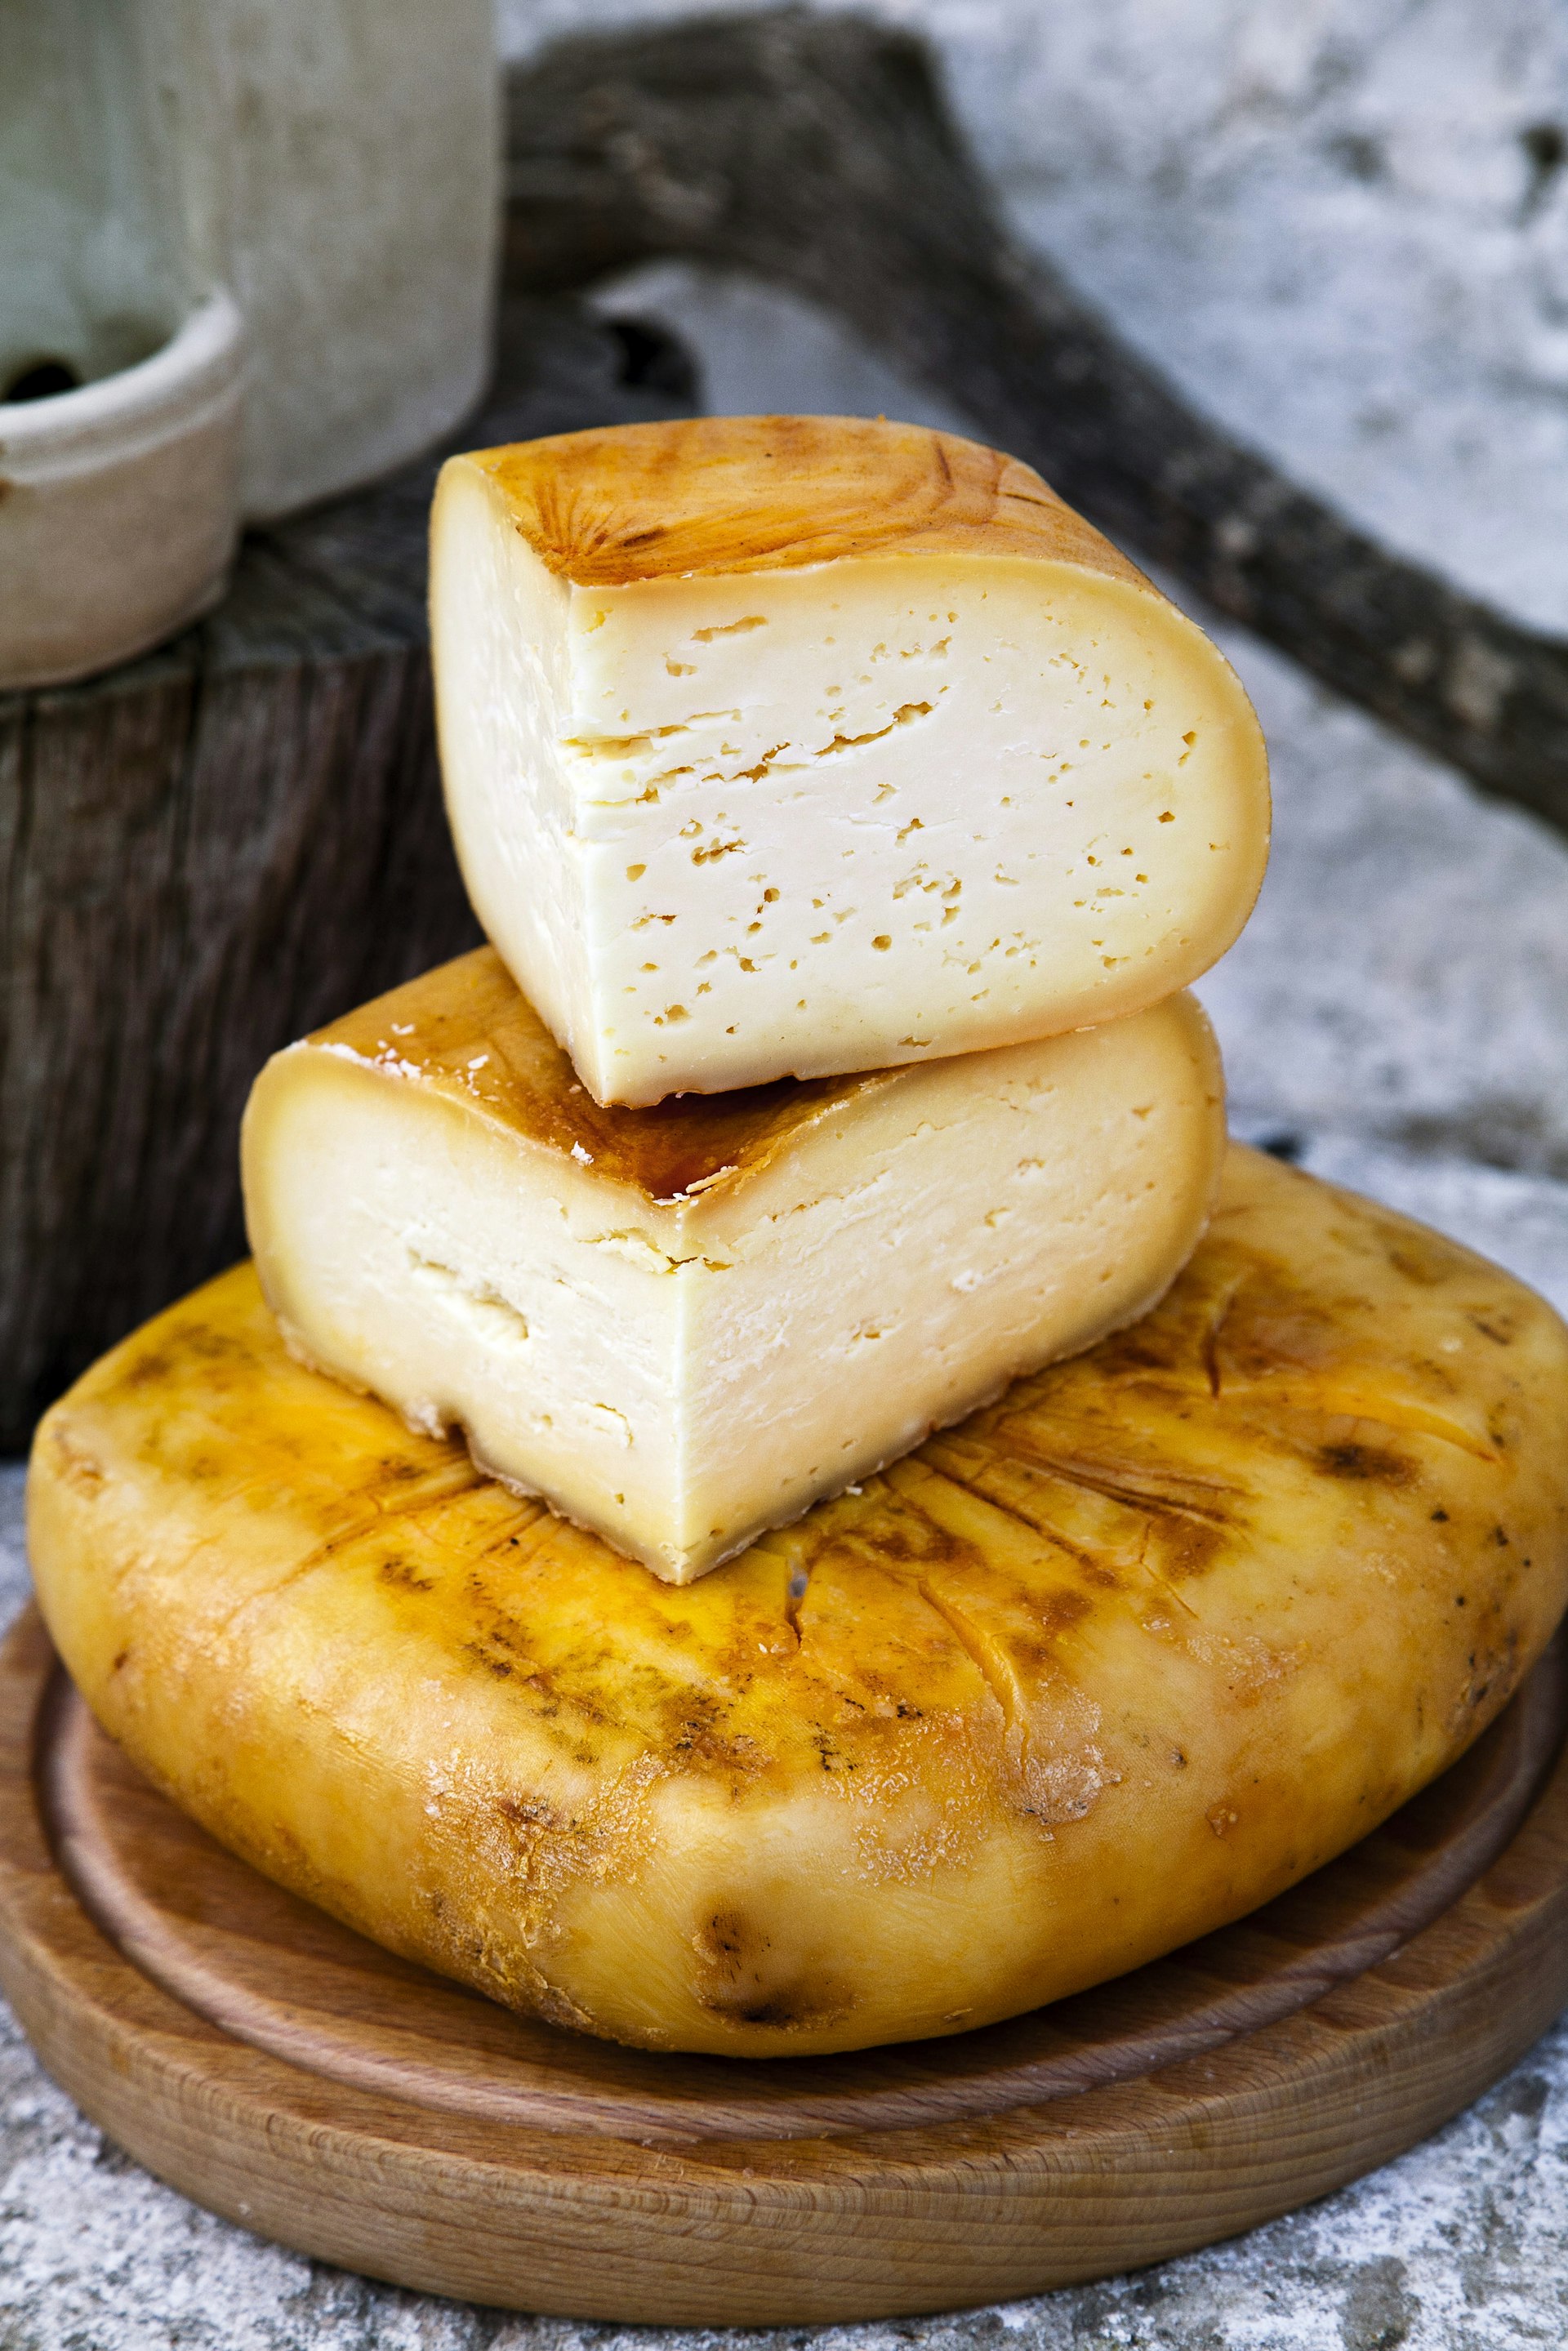 A stack of large round yellow-white cheeses on a wooden board